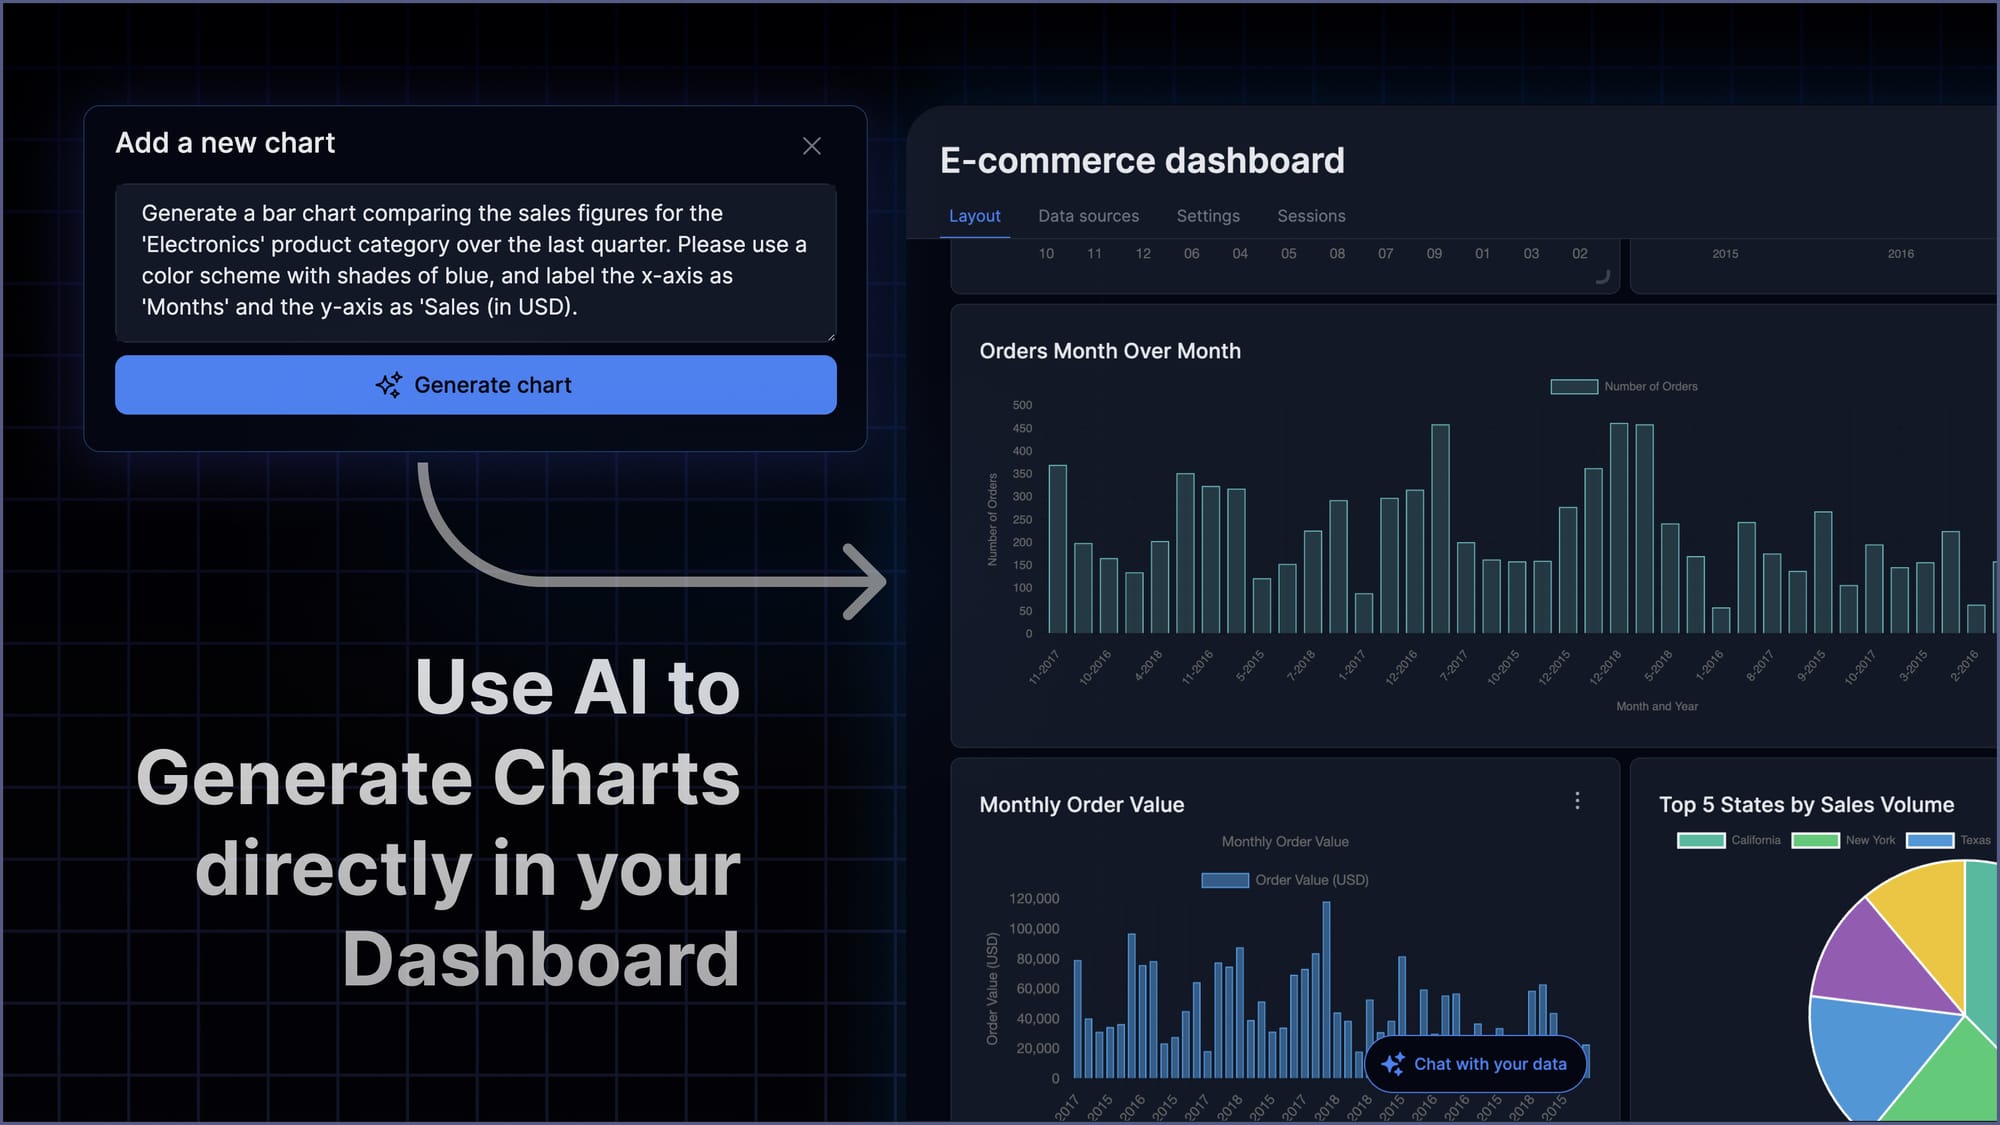 Boost Dashboard Engagement with the Power of AI